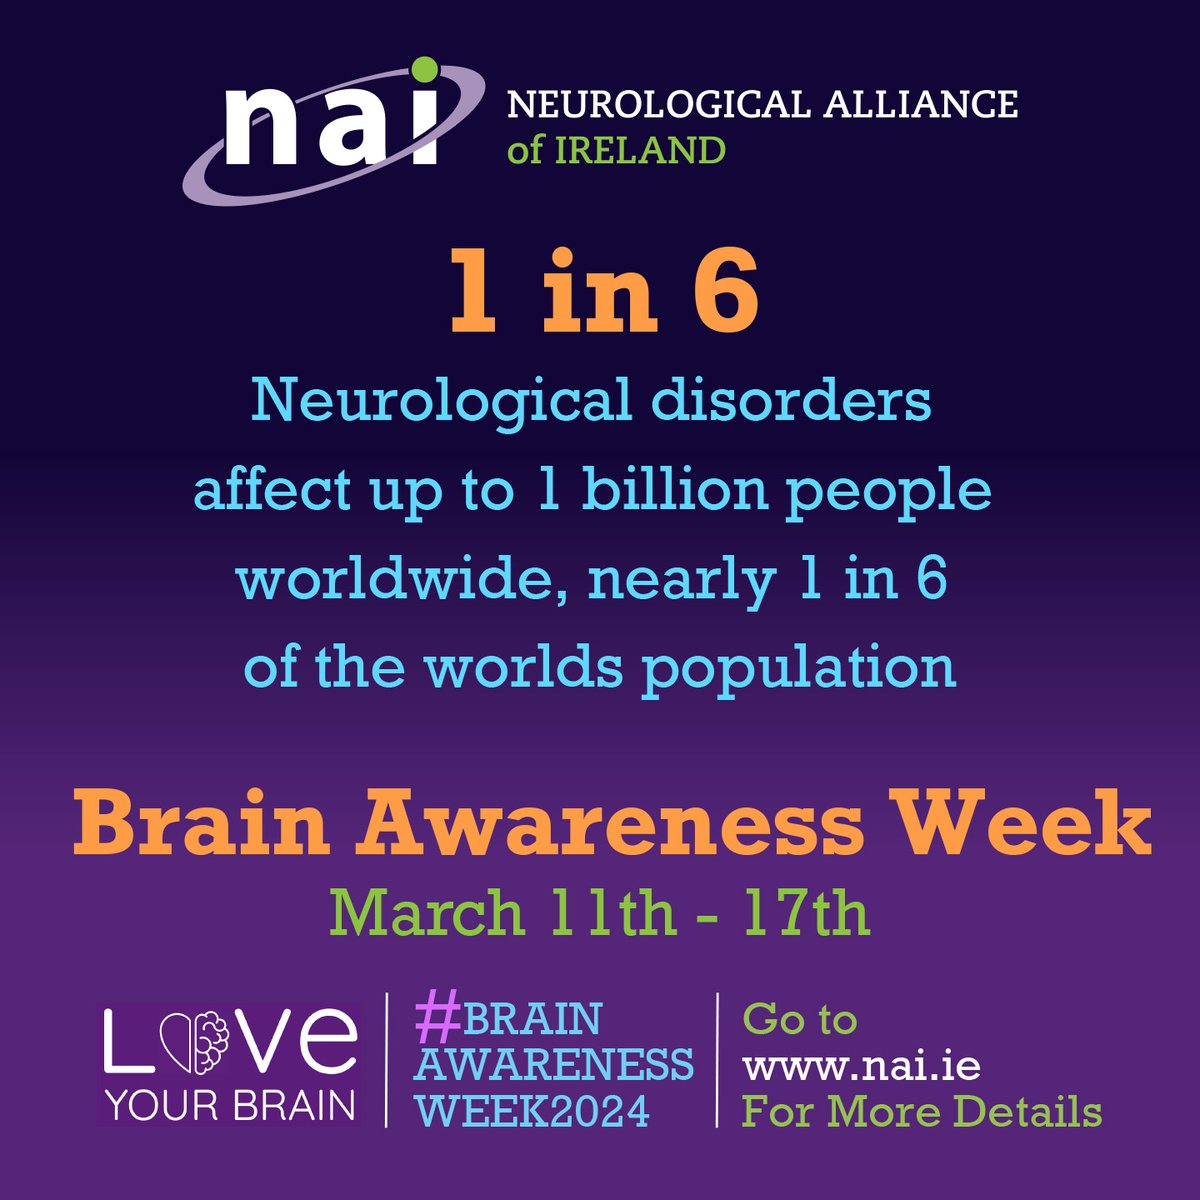 Did you know that neurological disorders affect up to 1 billion people worldwide? That is nearly 1 in 6 of the world's population. Show your support this #brainiawarenessweek2024 & promote awareness of the brain and brain conditions 🧠#loveyourbrain